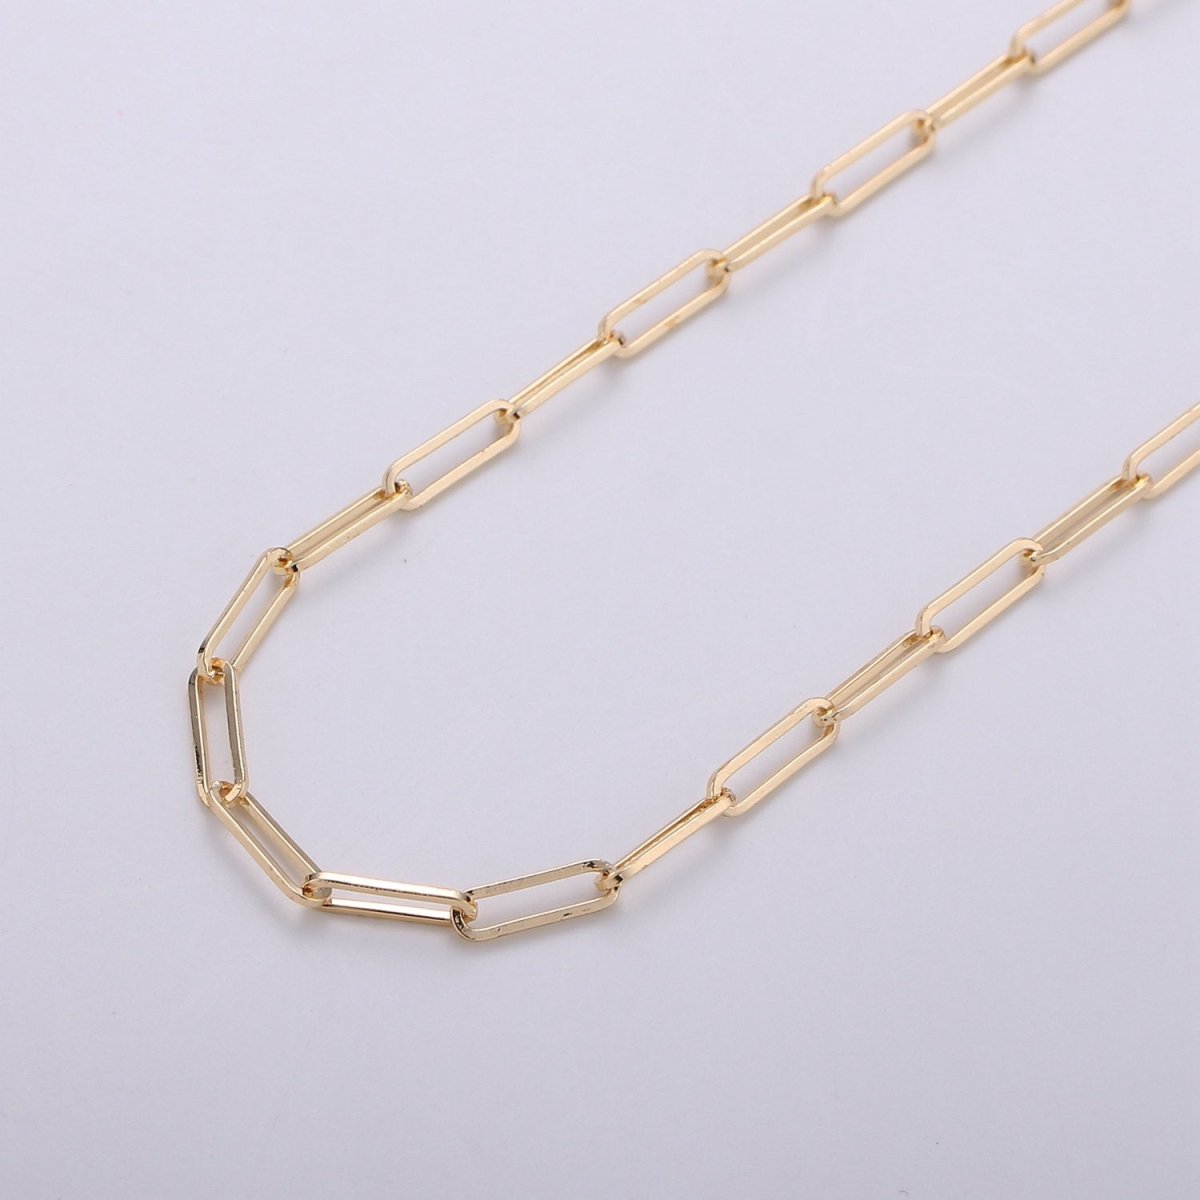 Fashion Paperclip Chain Link Necklace Sizes 16 18 20 22 24